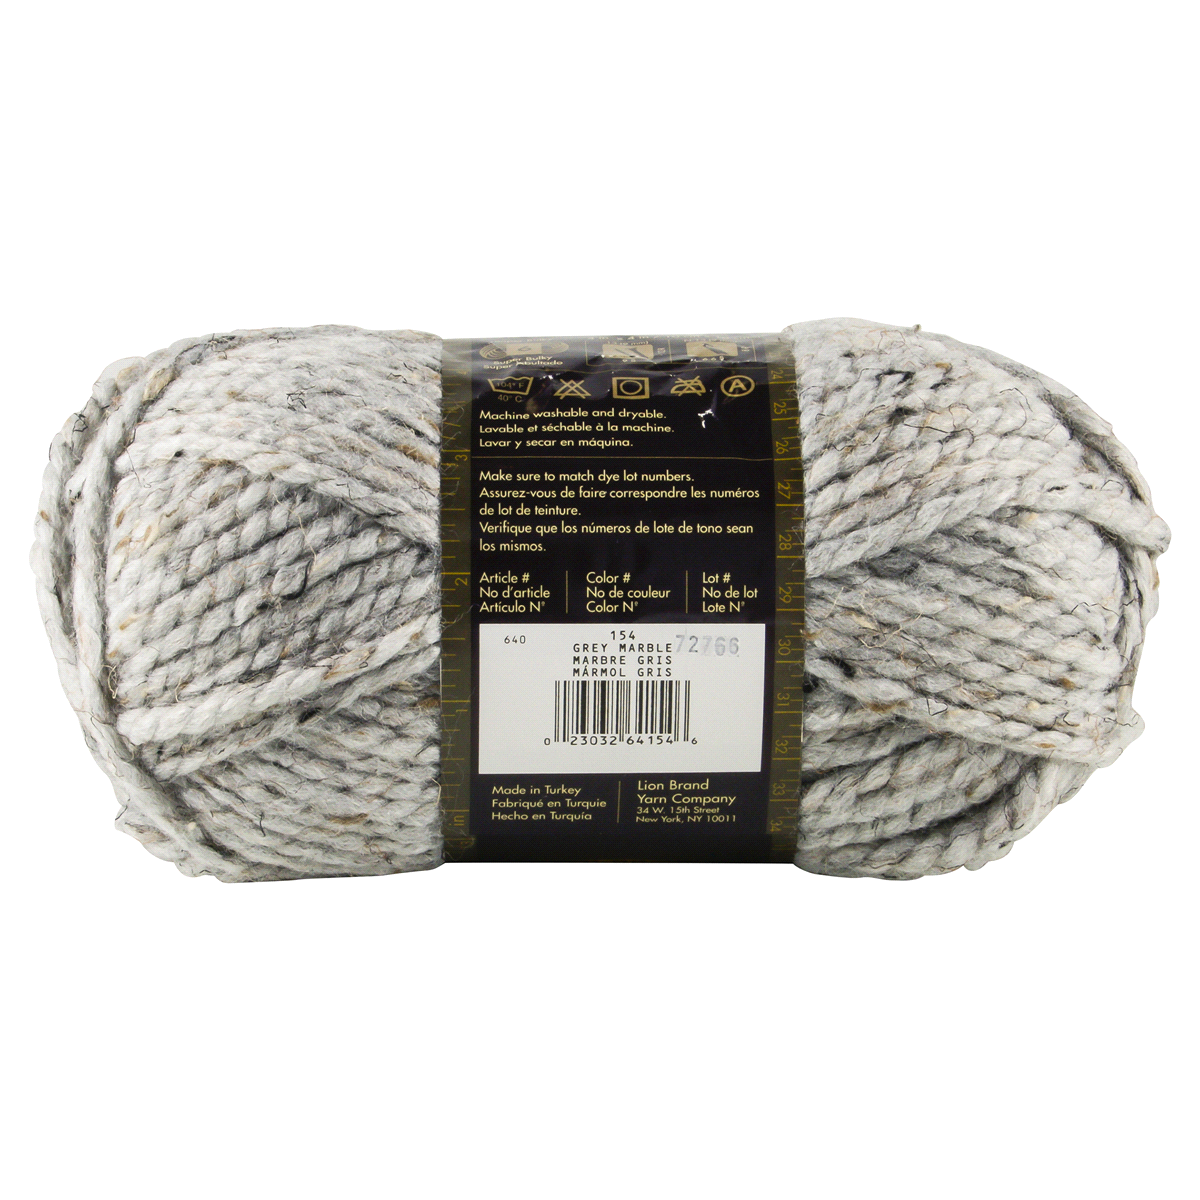 Lion Brand Wool-ease Thick & Quick Yarn : Target